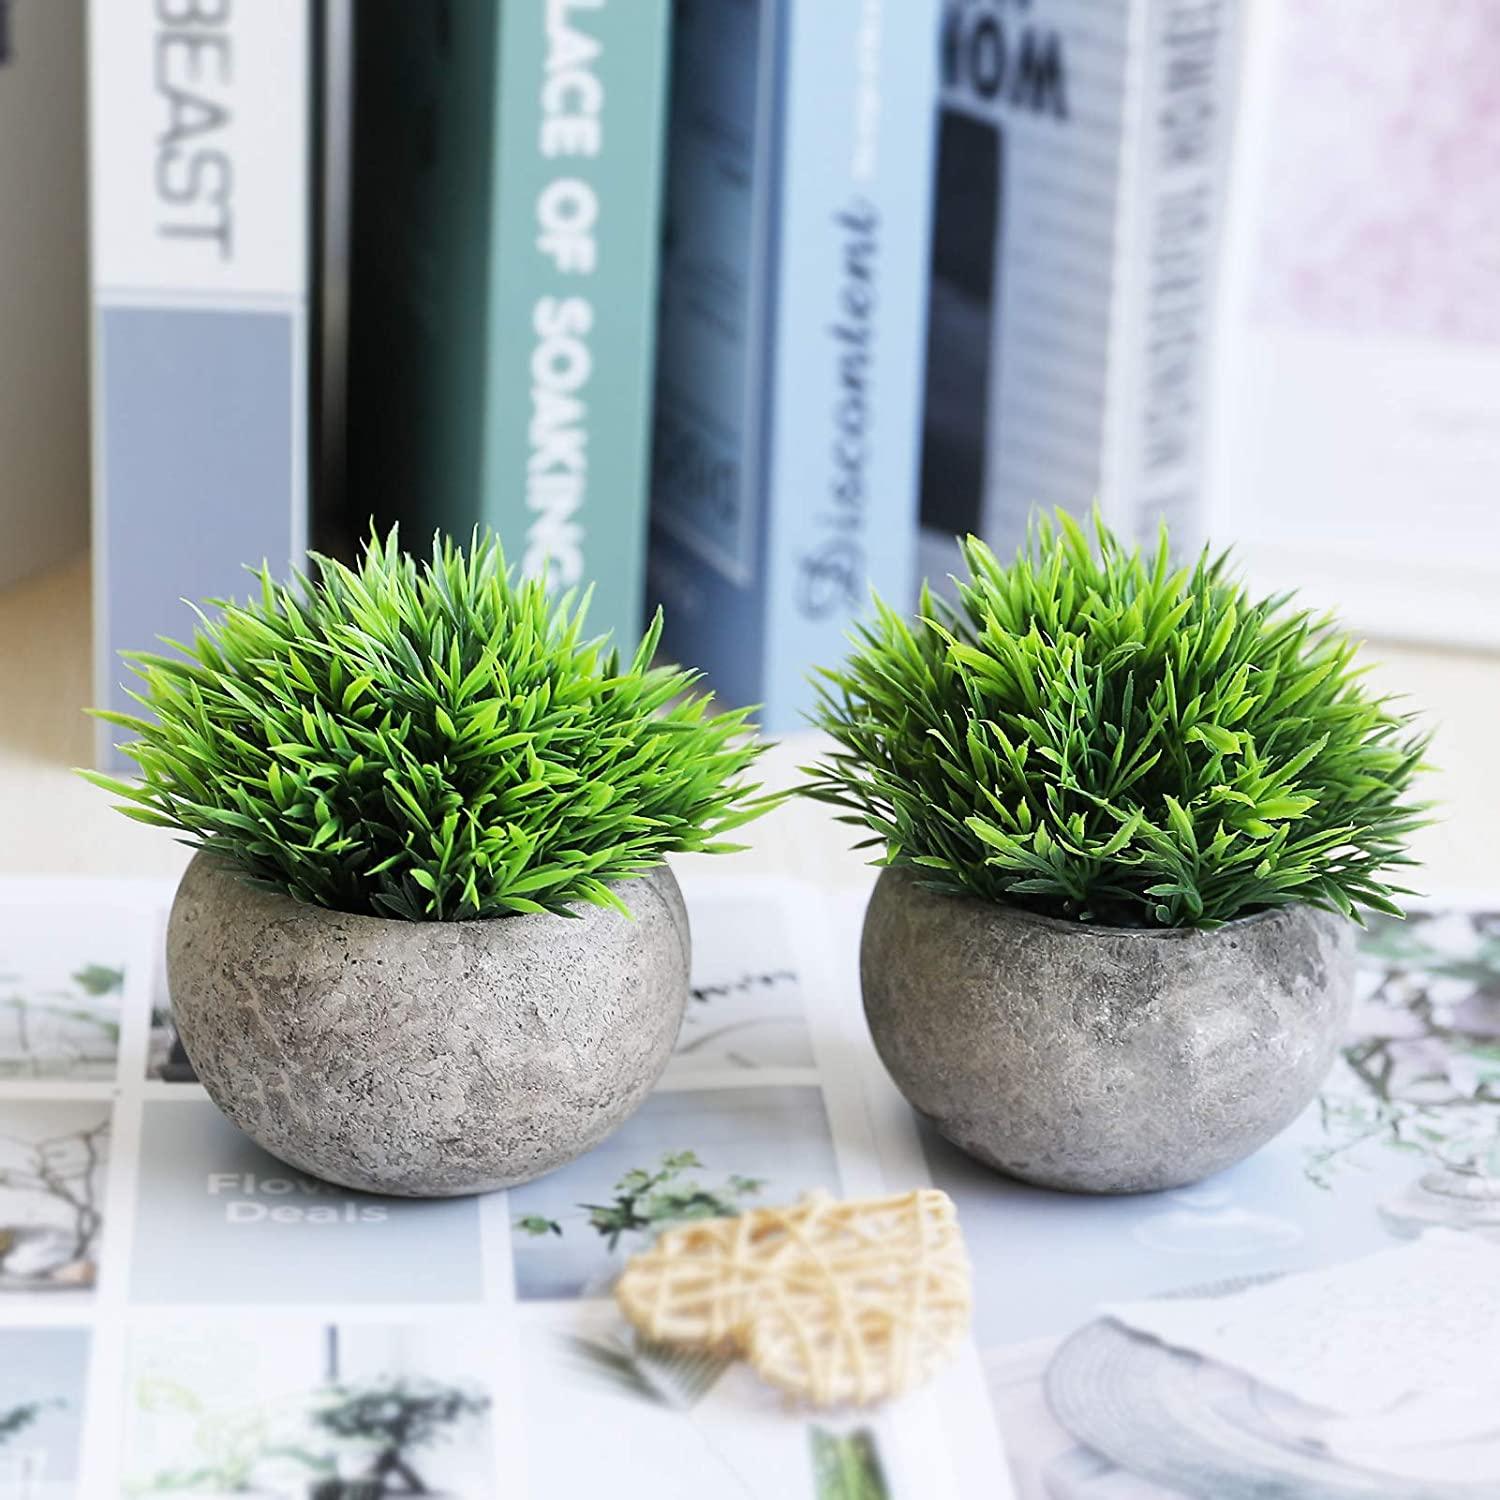 2 Pcs Fake Plants for Bathroom/Home Office Decor, Small Artificial Faux Greenery for House Decorations (Potted Plants) - If you say i do